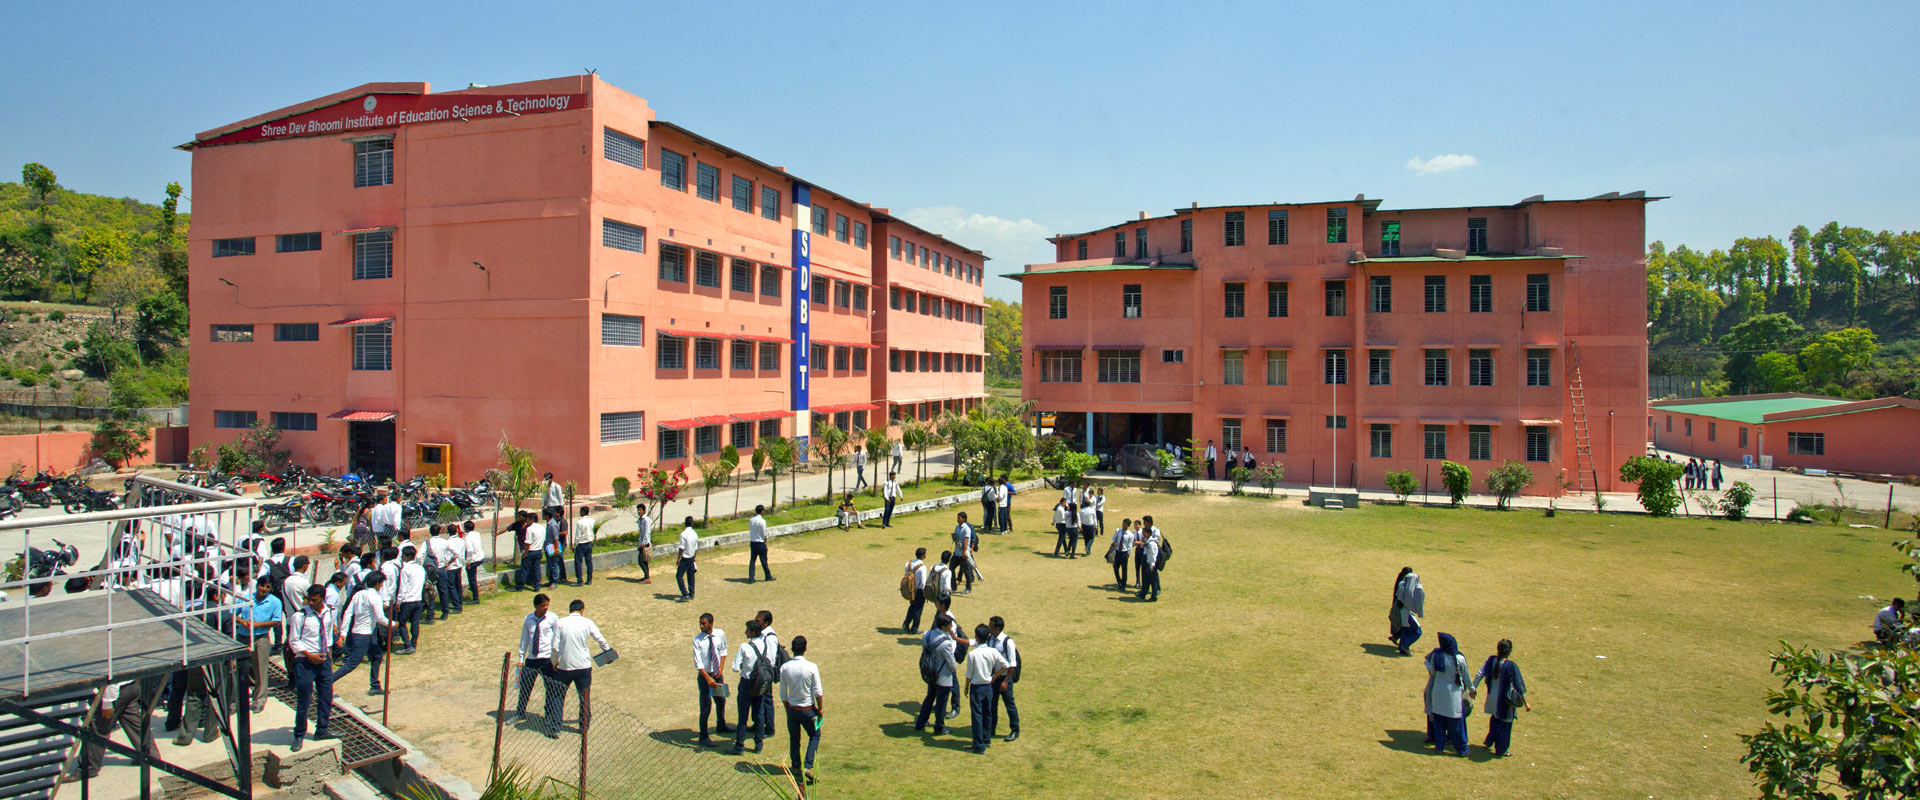 Shree Dev Bhoomi Institute of Education, Science and Technology, Dehradun Image